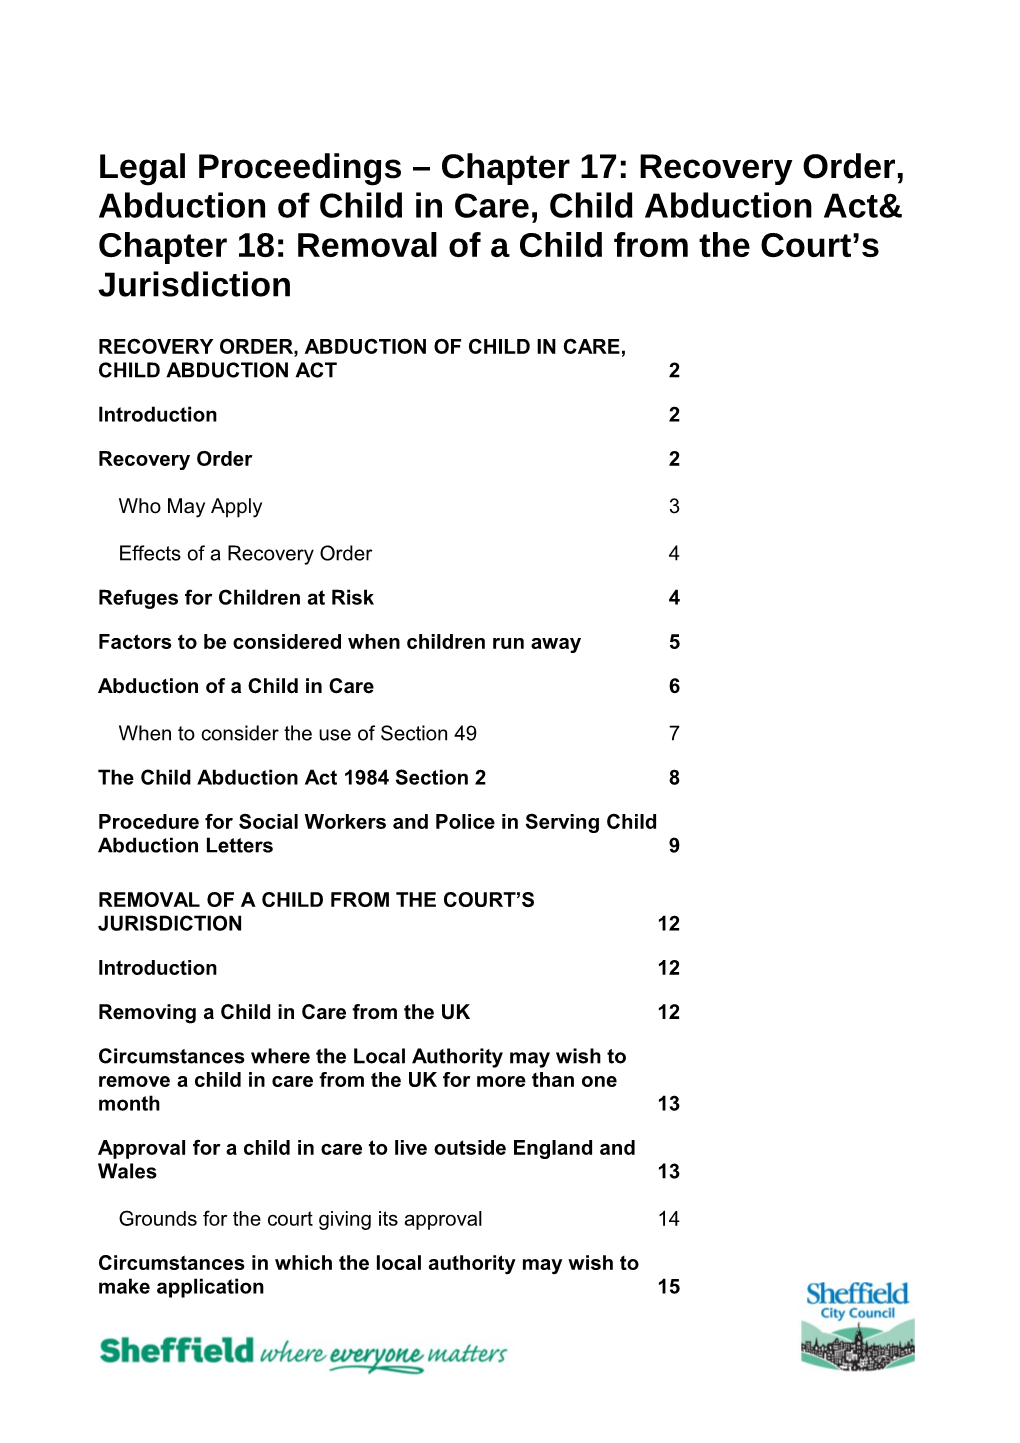 Recovery Order, Abduction of Child in Care, Child Abduction Act